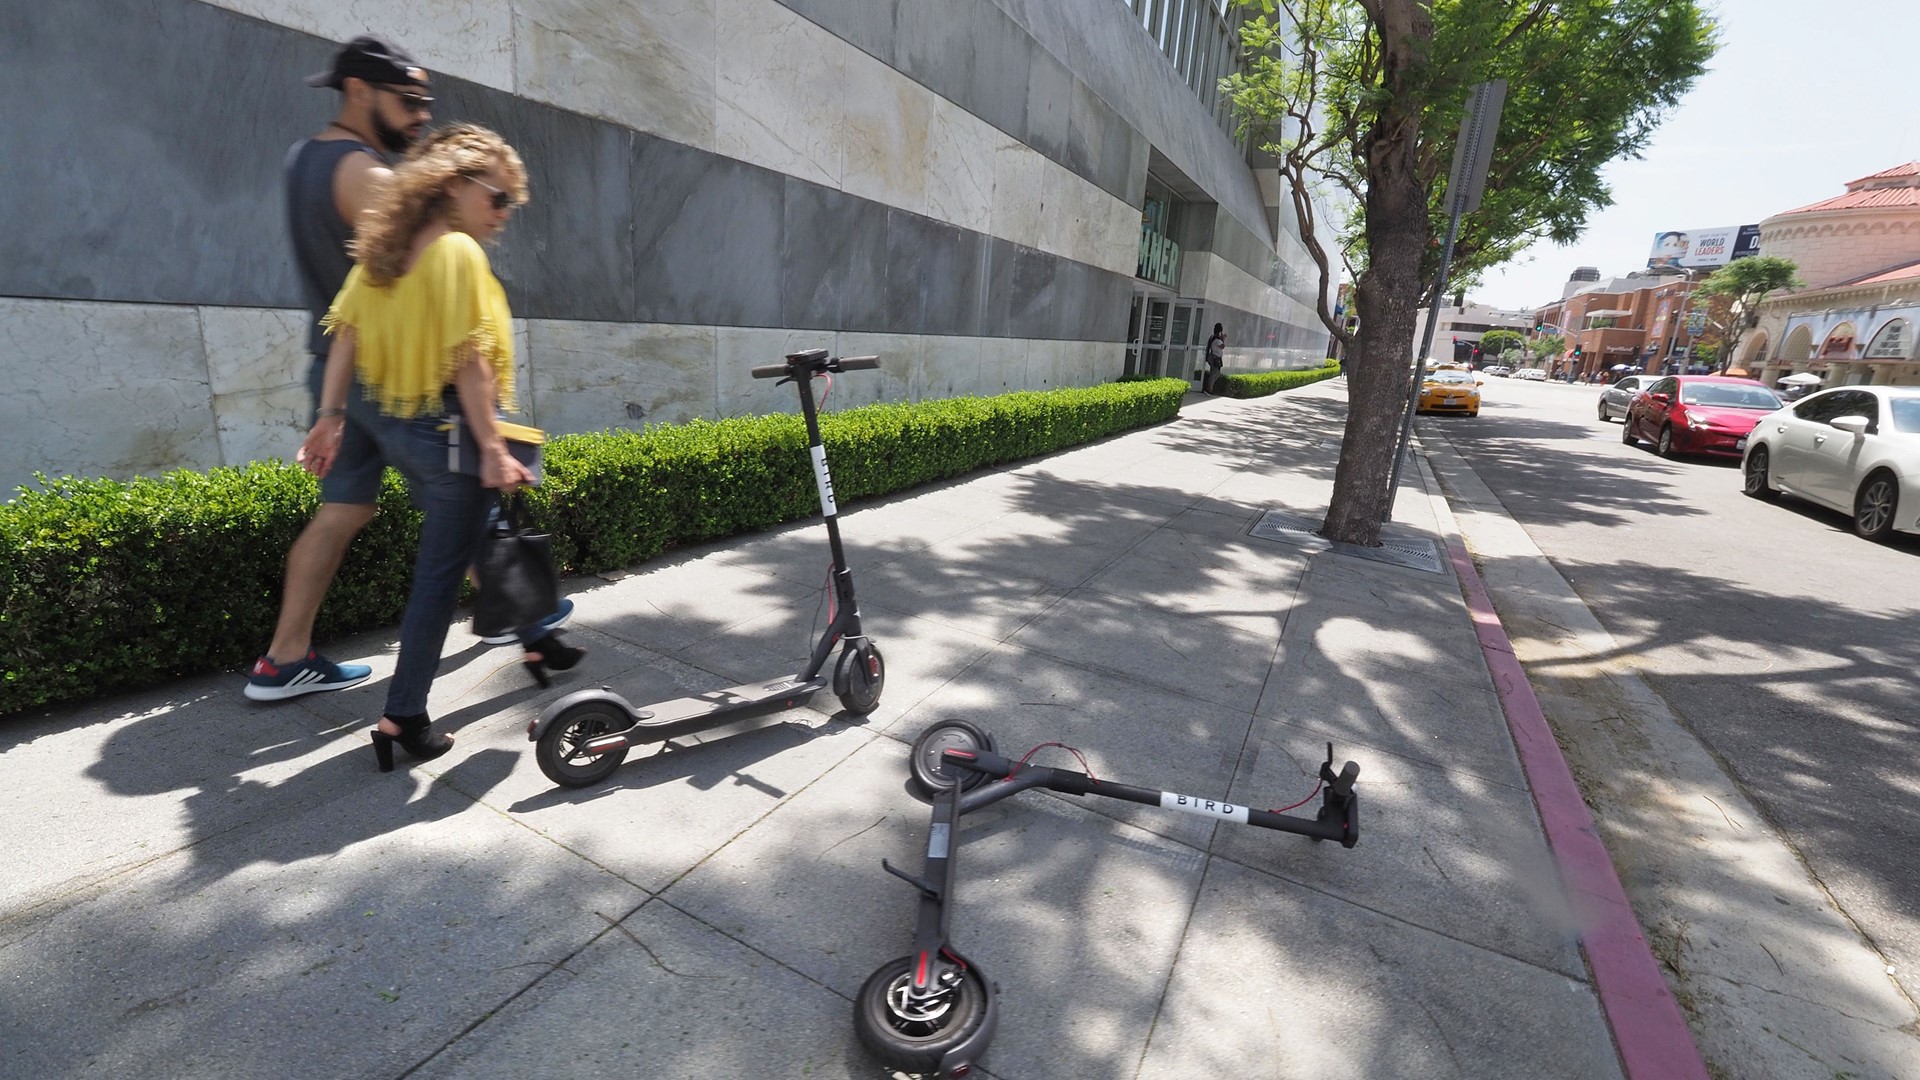 UGA, which is located in Athens, banned the scooters in August and has already confiscated over 1,000 dockless scooters.